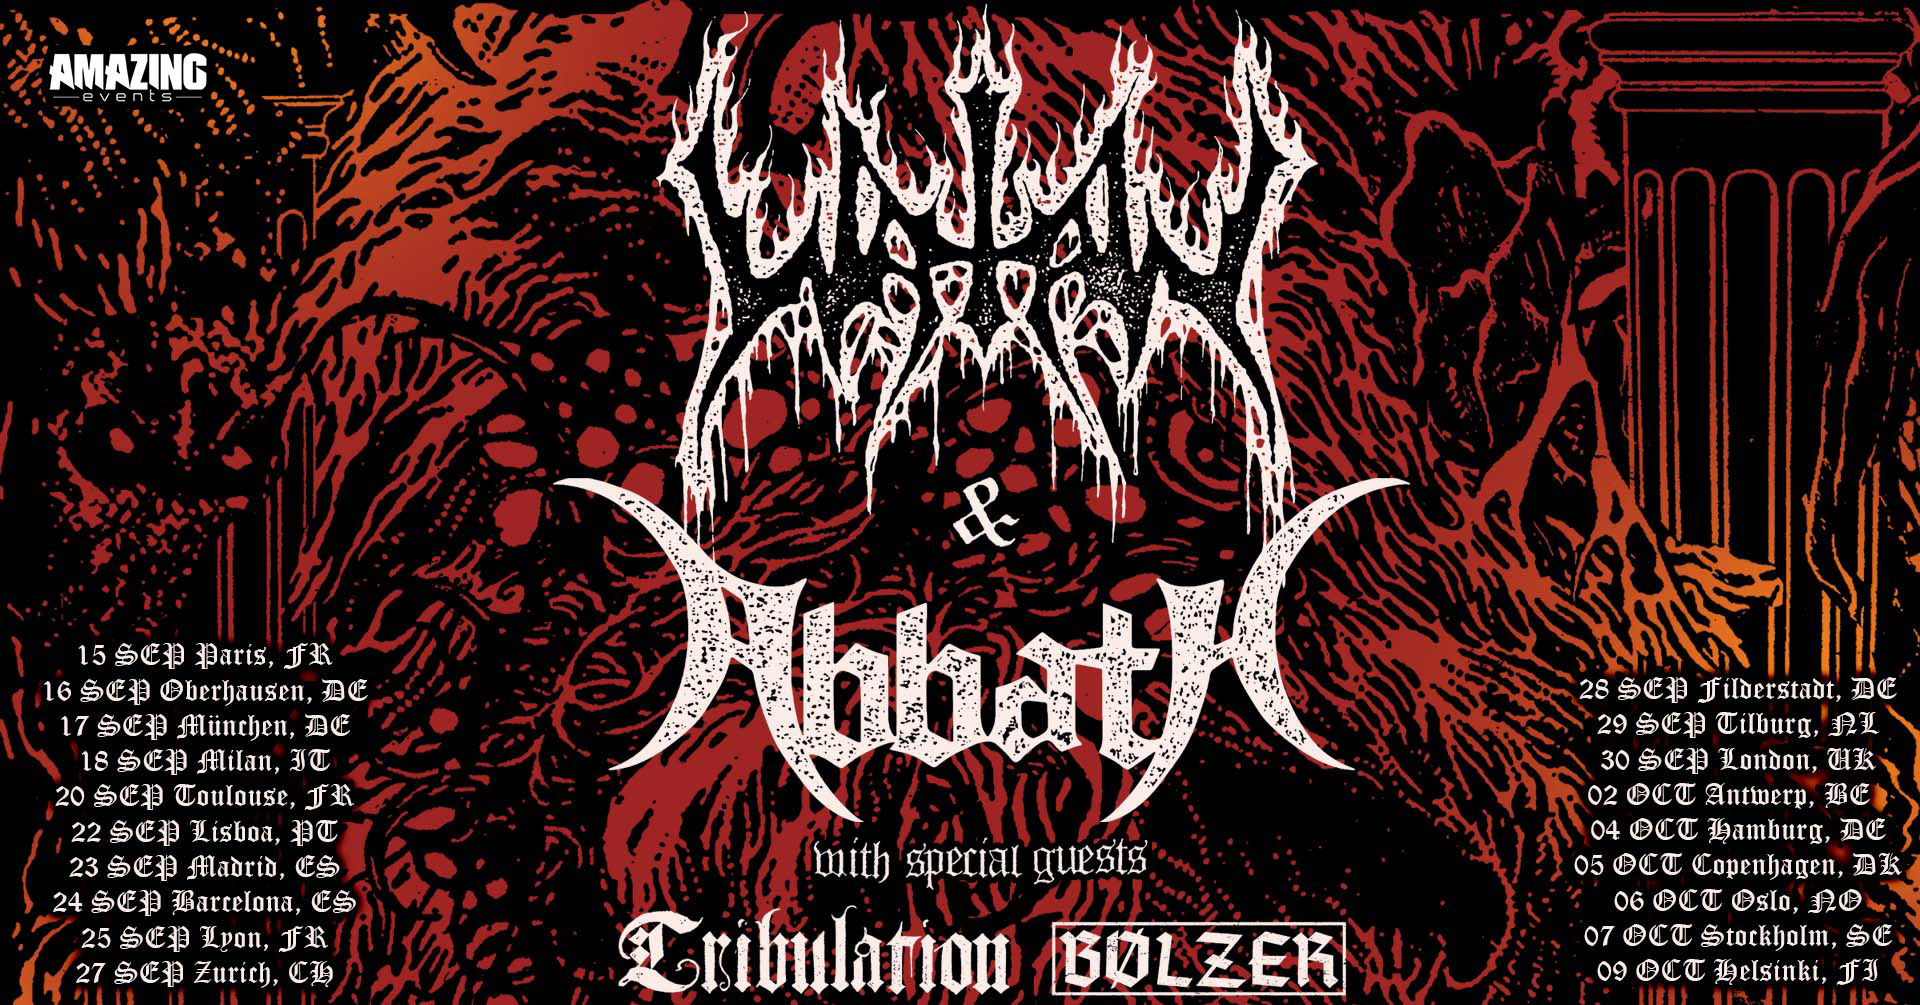 Chariots Of Fire Tour : Watain + Abbath with special guests Tribulation + Bolzer